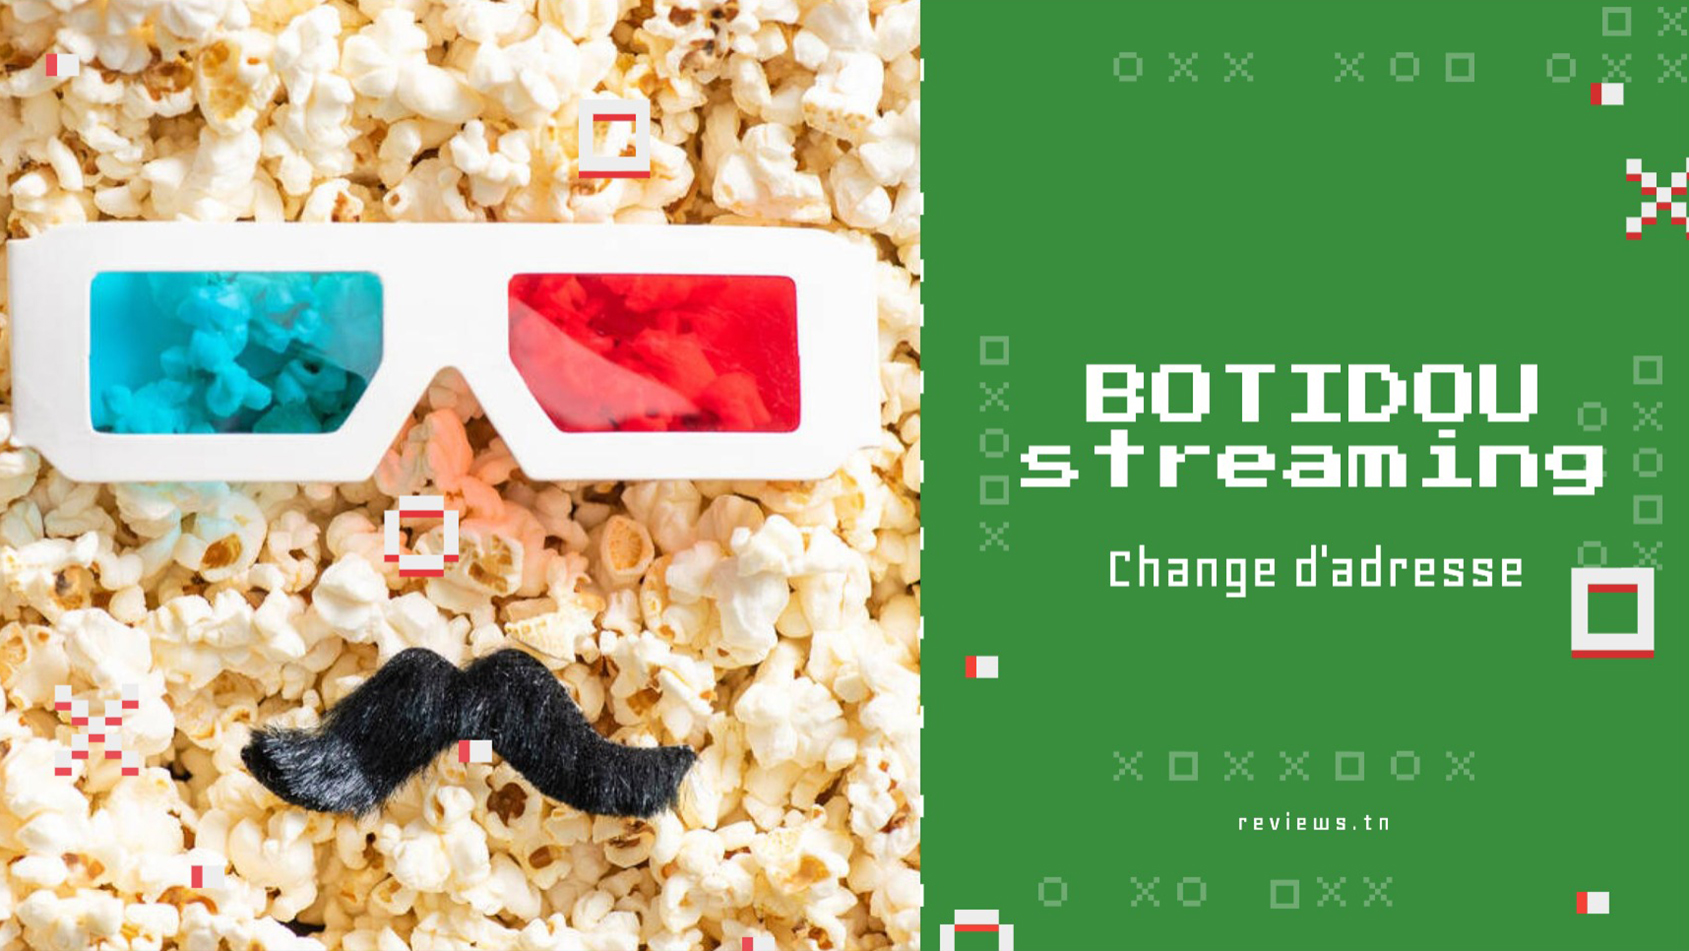 Botidou: The Free Streaming Site changes address